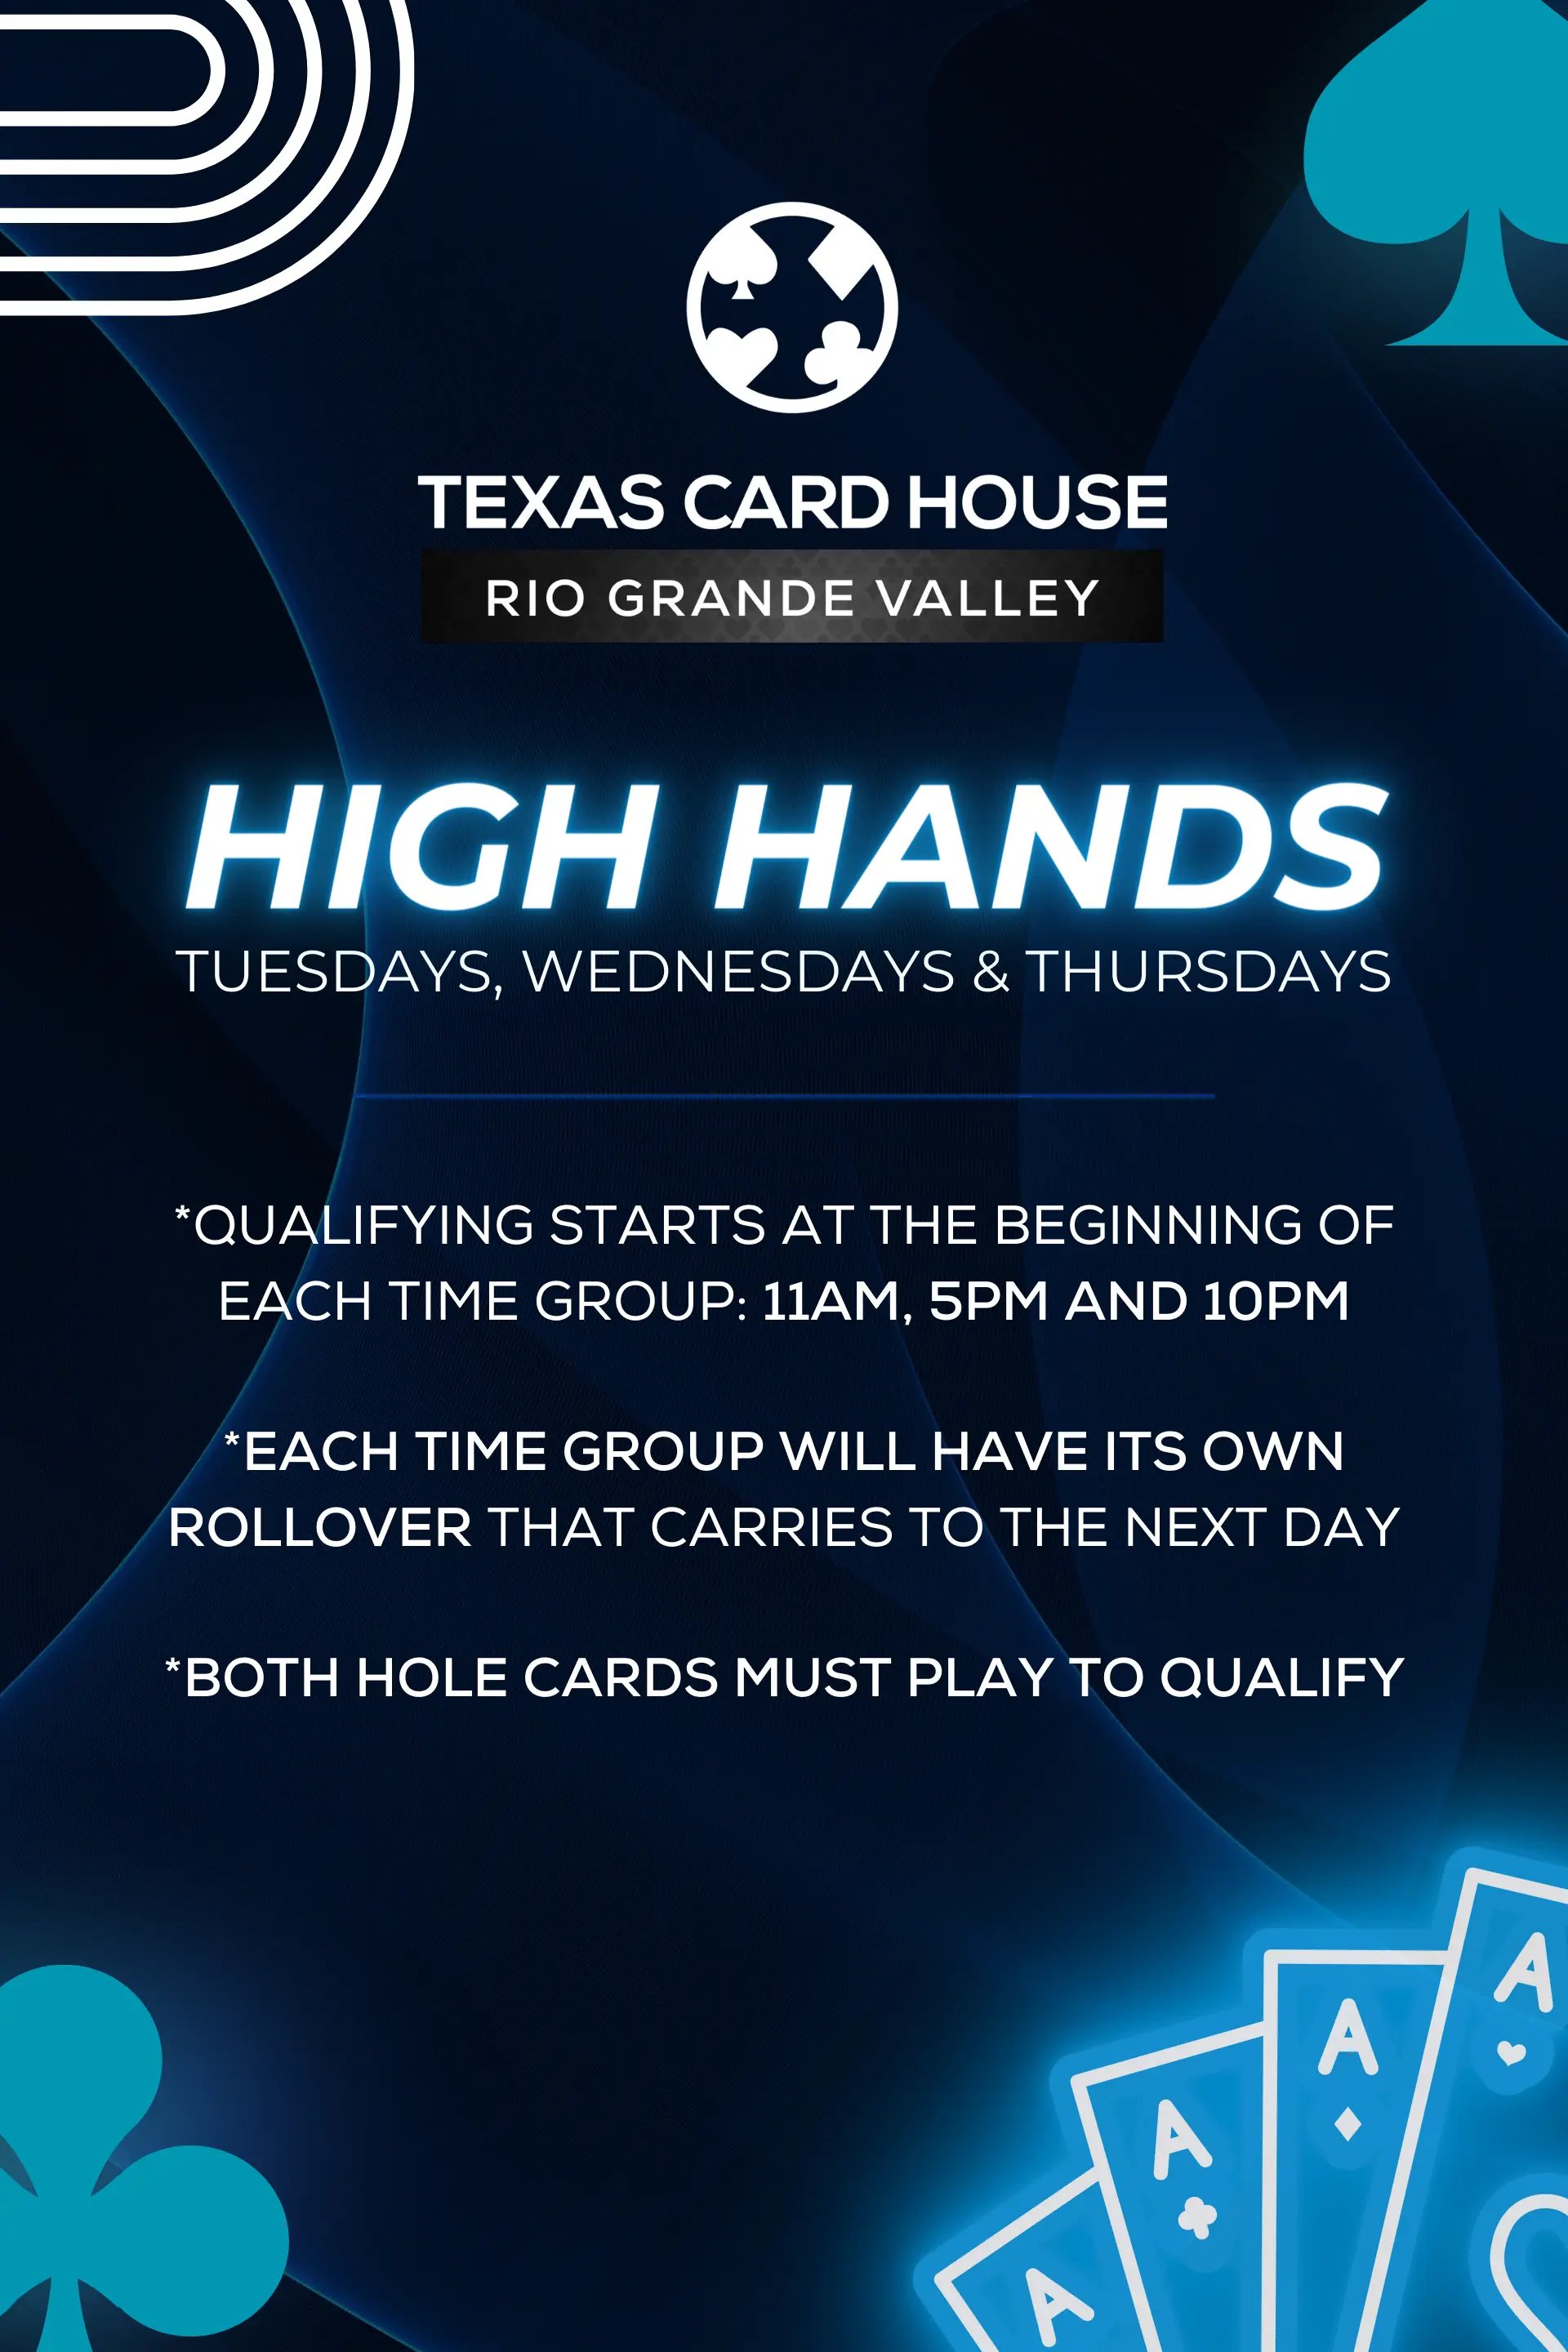 HighHands Rules